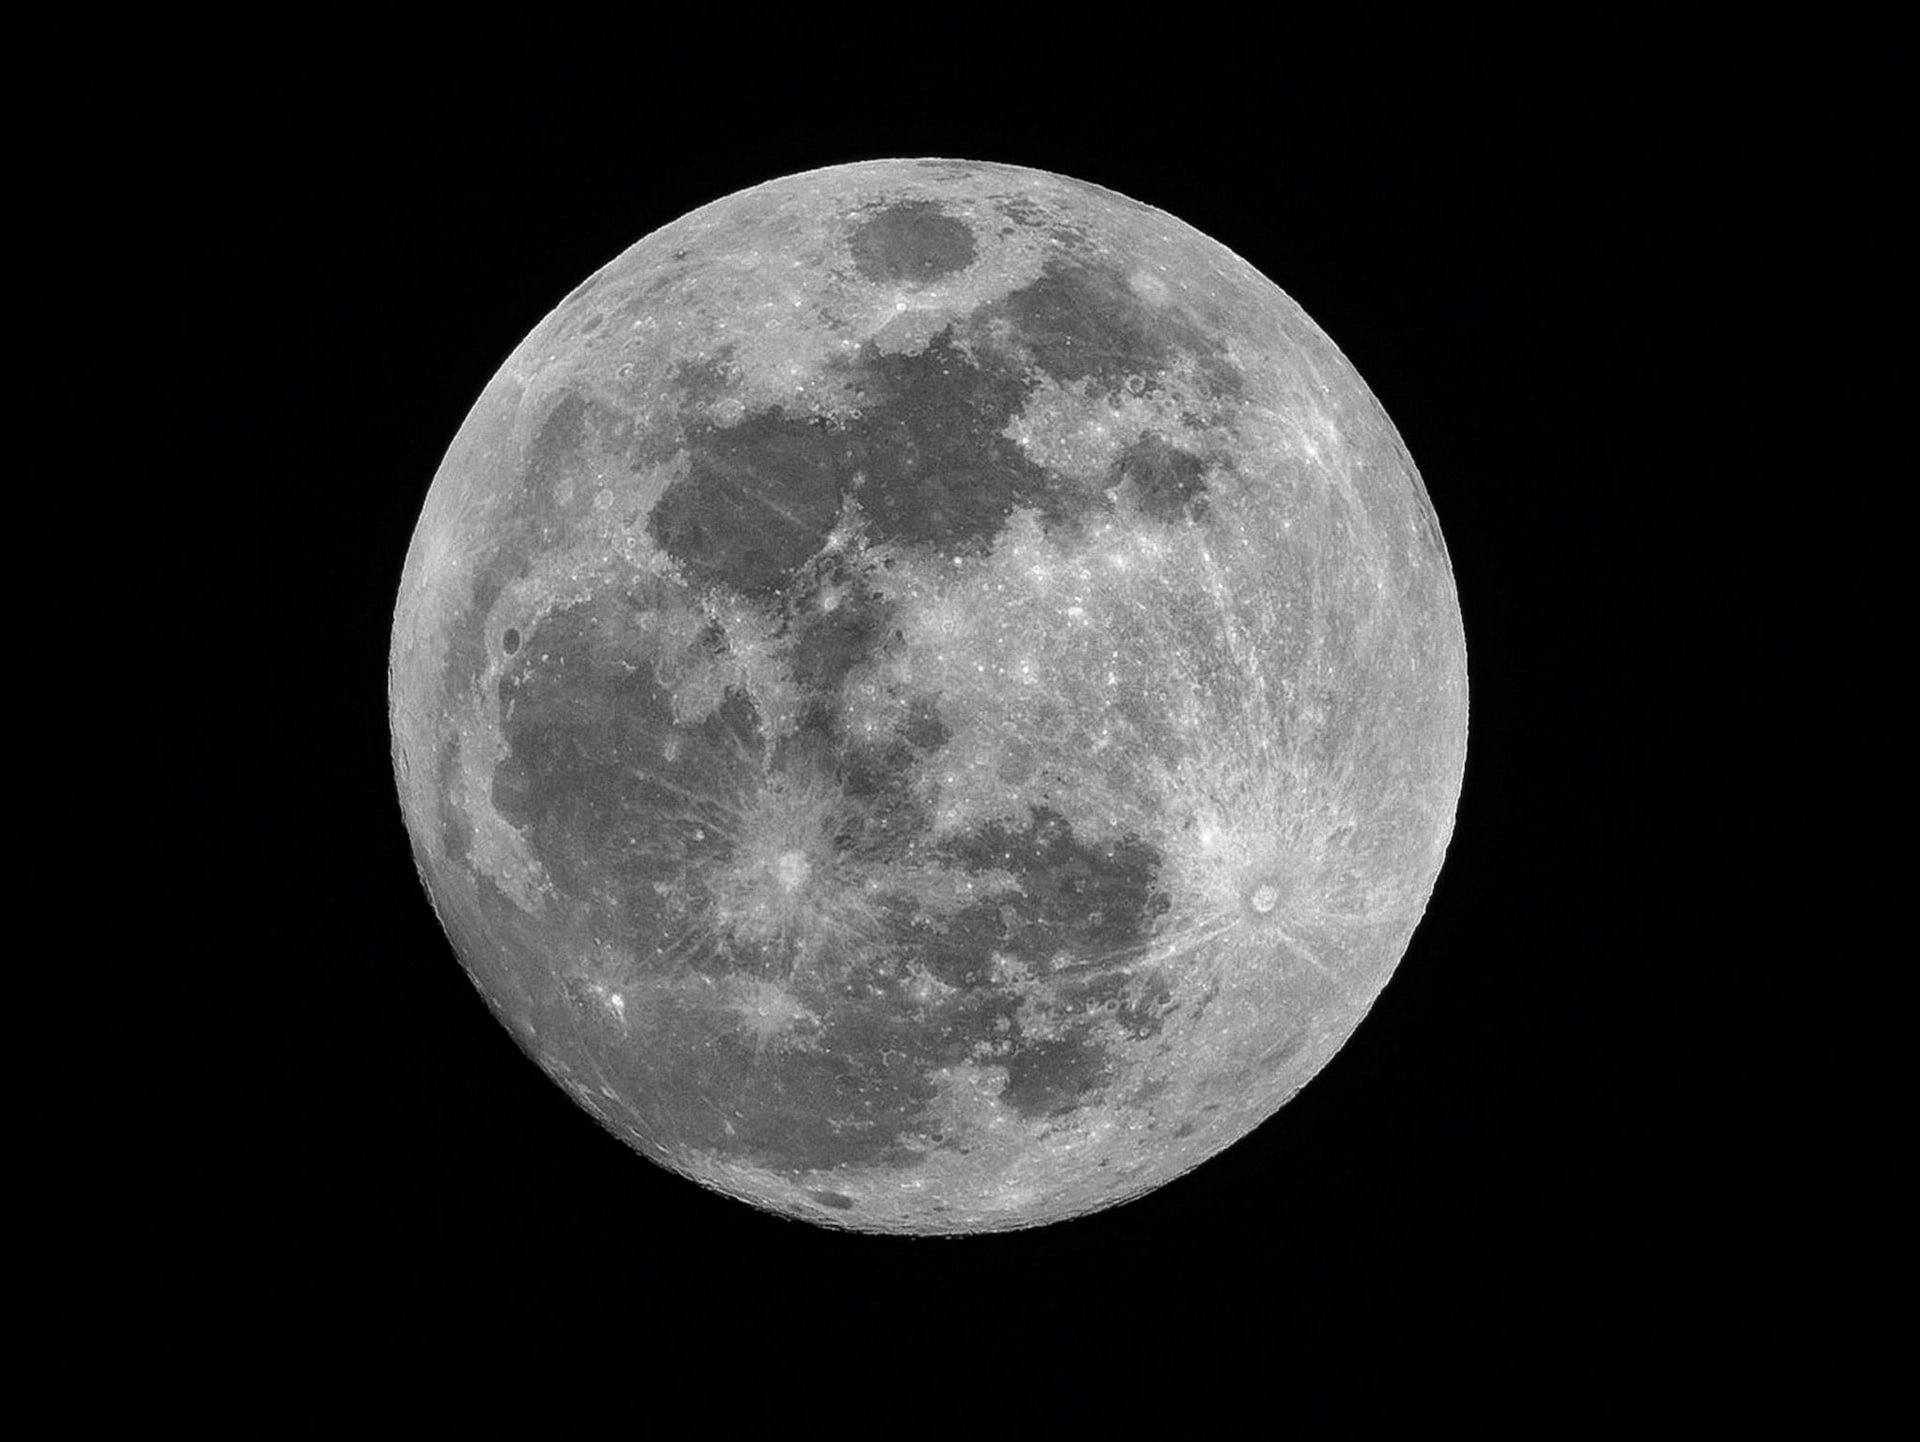 The Moon: An In-Depth Look at Earth’s Natural Satellite